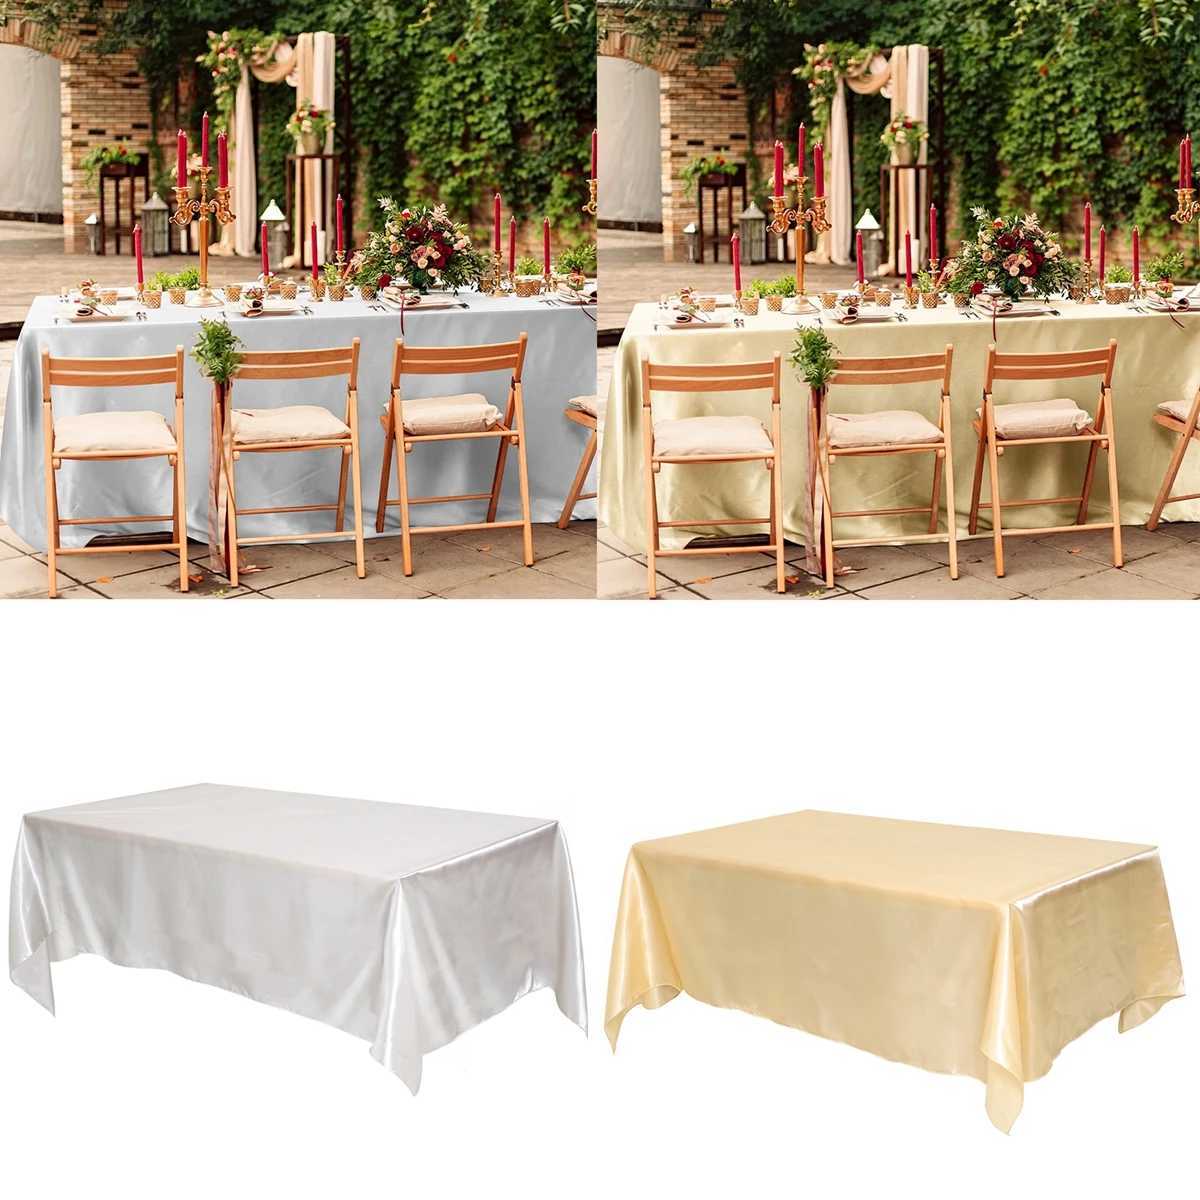 Table Cloth 145x220cm rectangular satin tablecloth wedding tablecloth party tablecloth baby shower birthday banquet home dining table decoration 240426